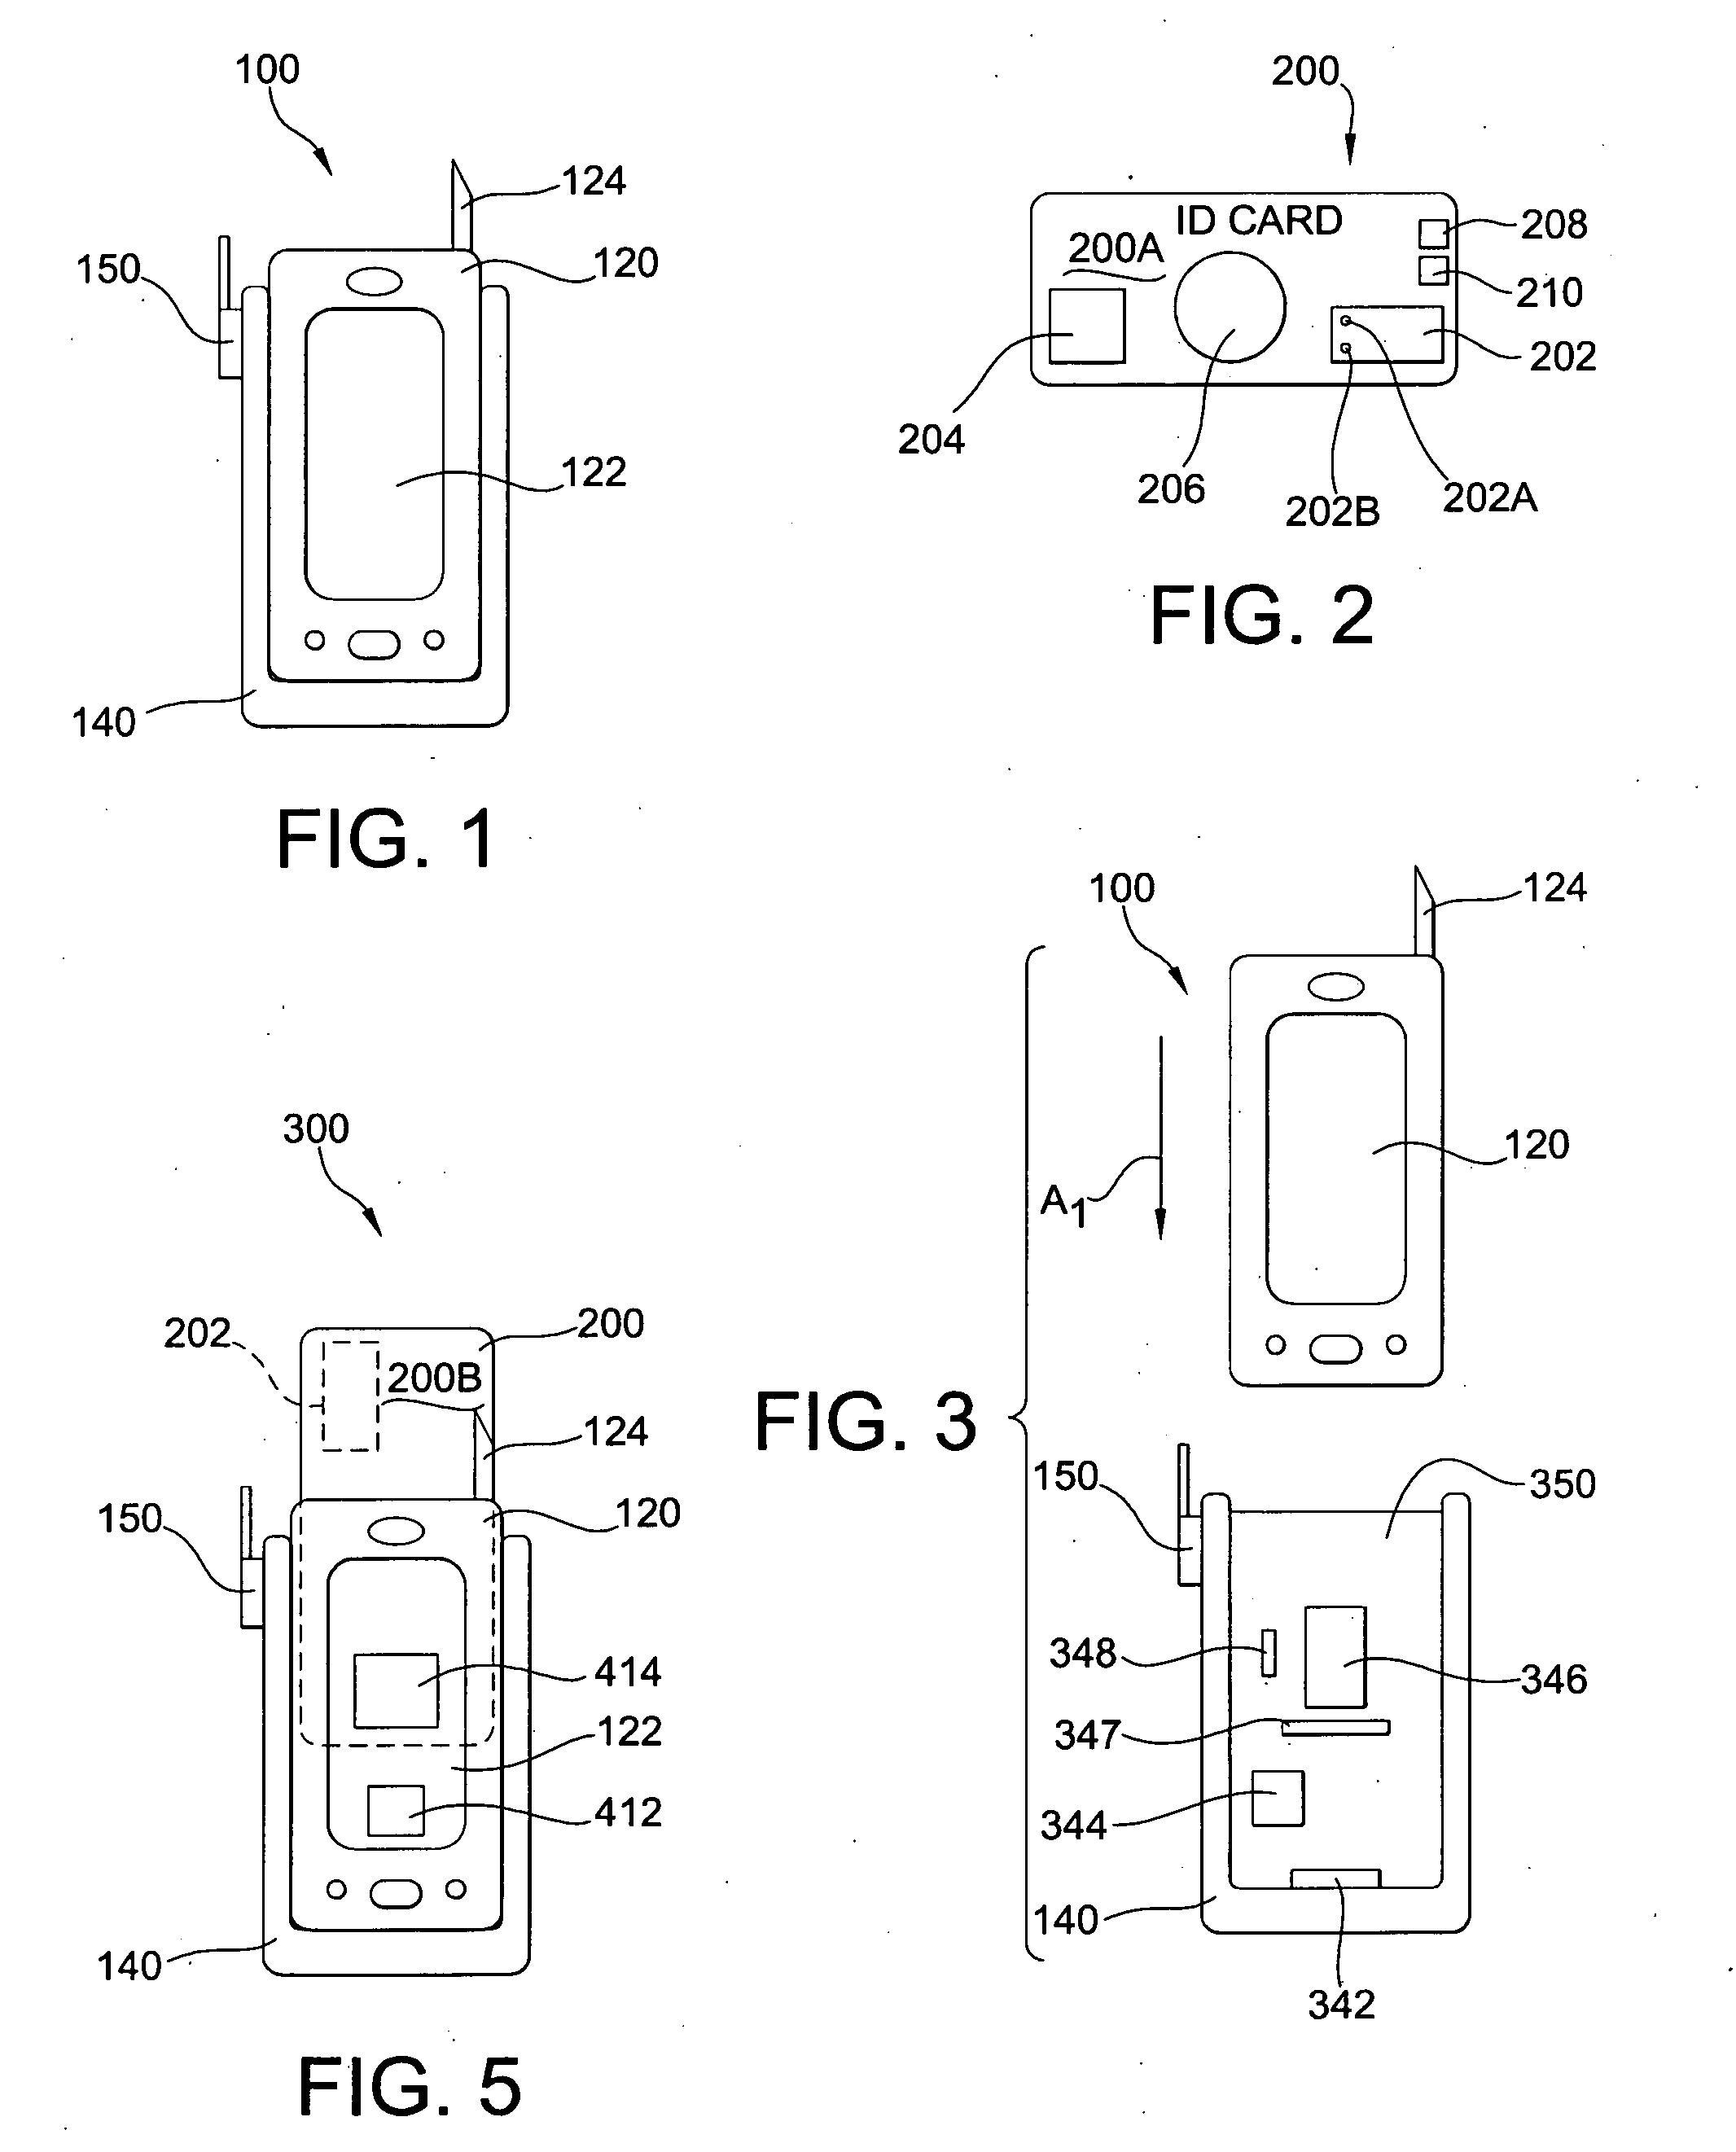 Identity verification system with self-authenticating card